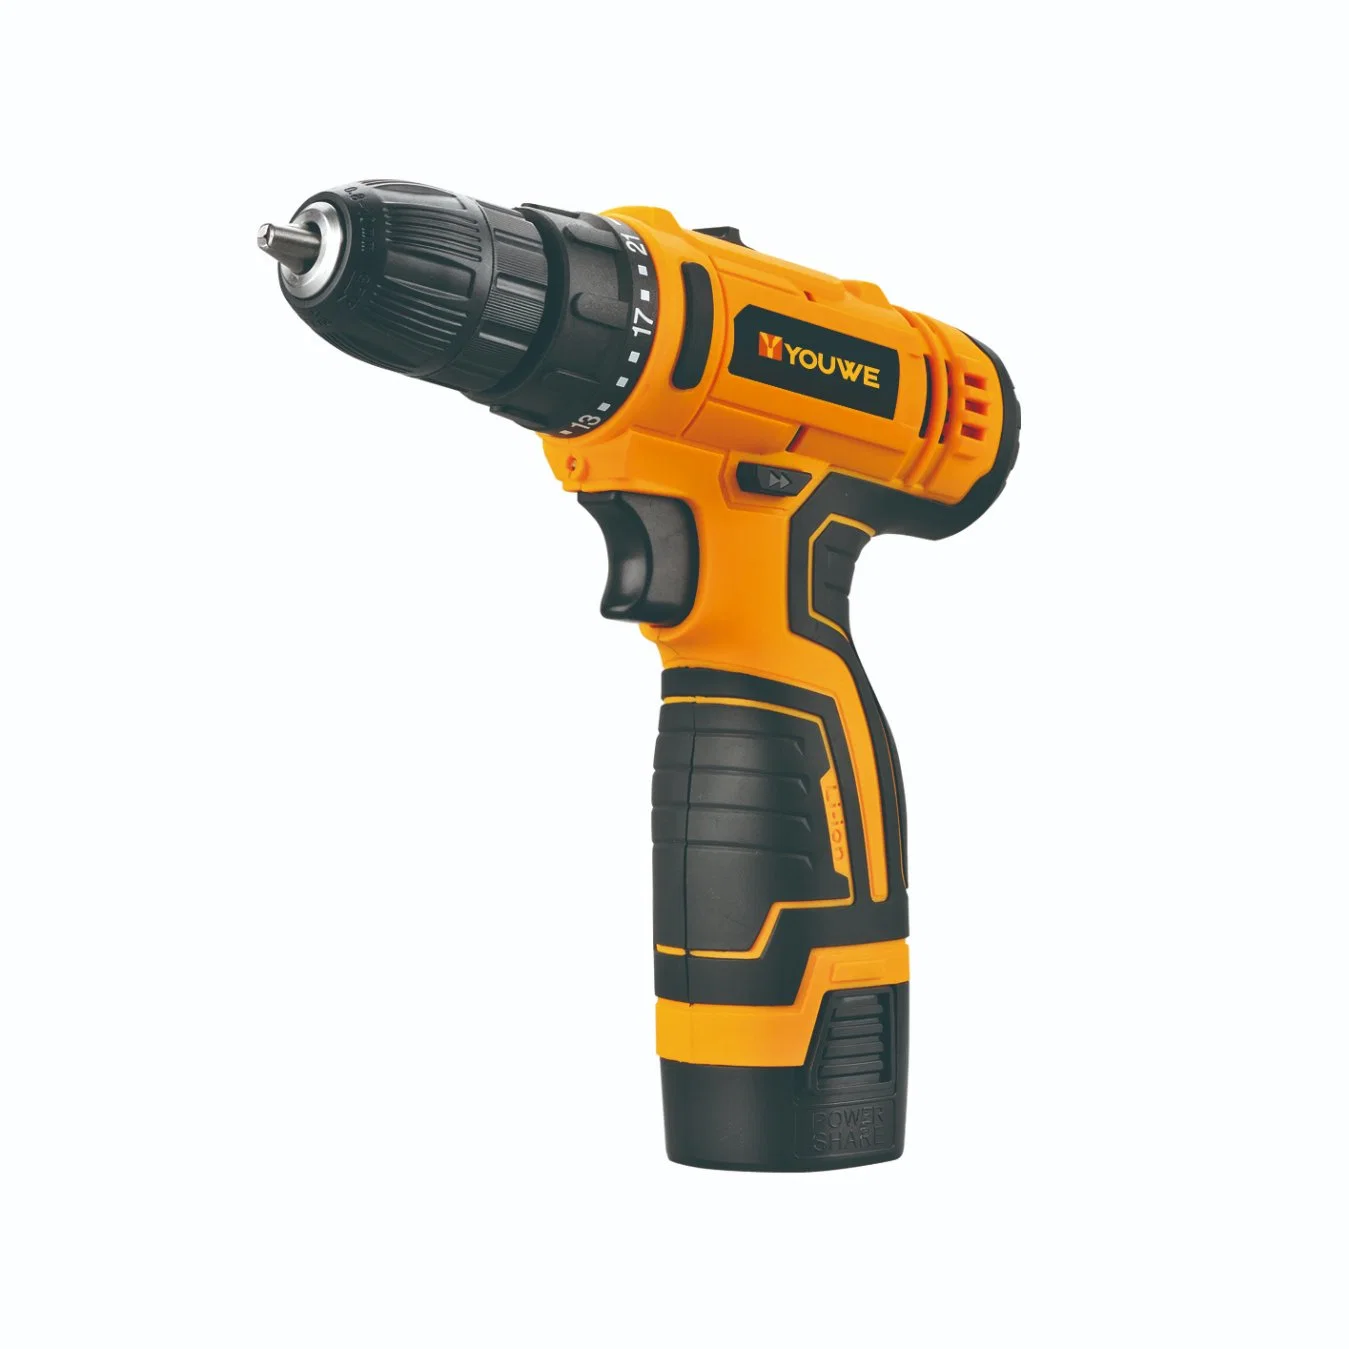 Youwe Cordless Battery Drill 2 Speed, 18+3 Torque Hammer Drill